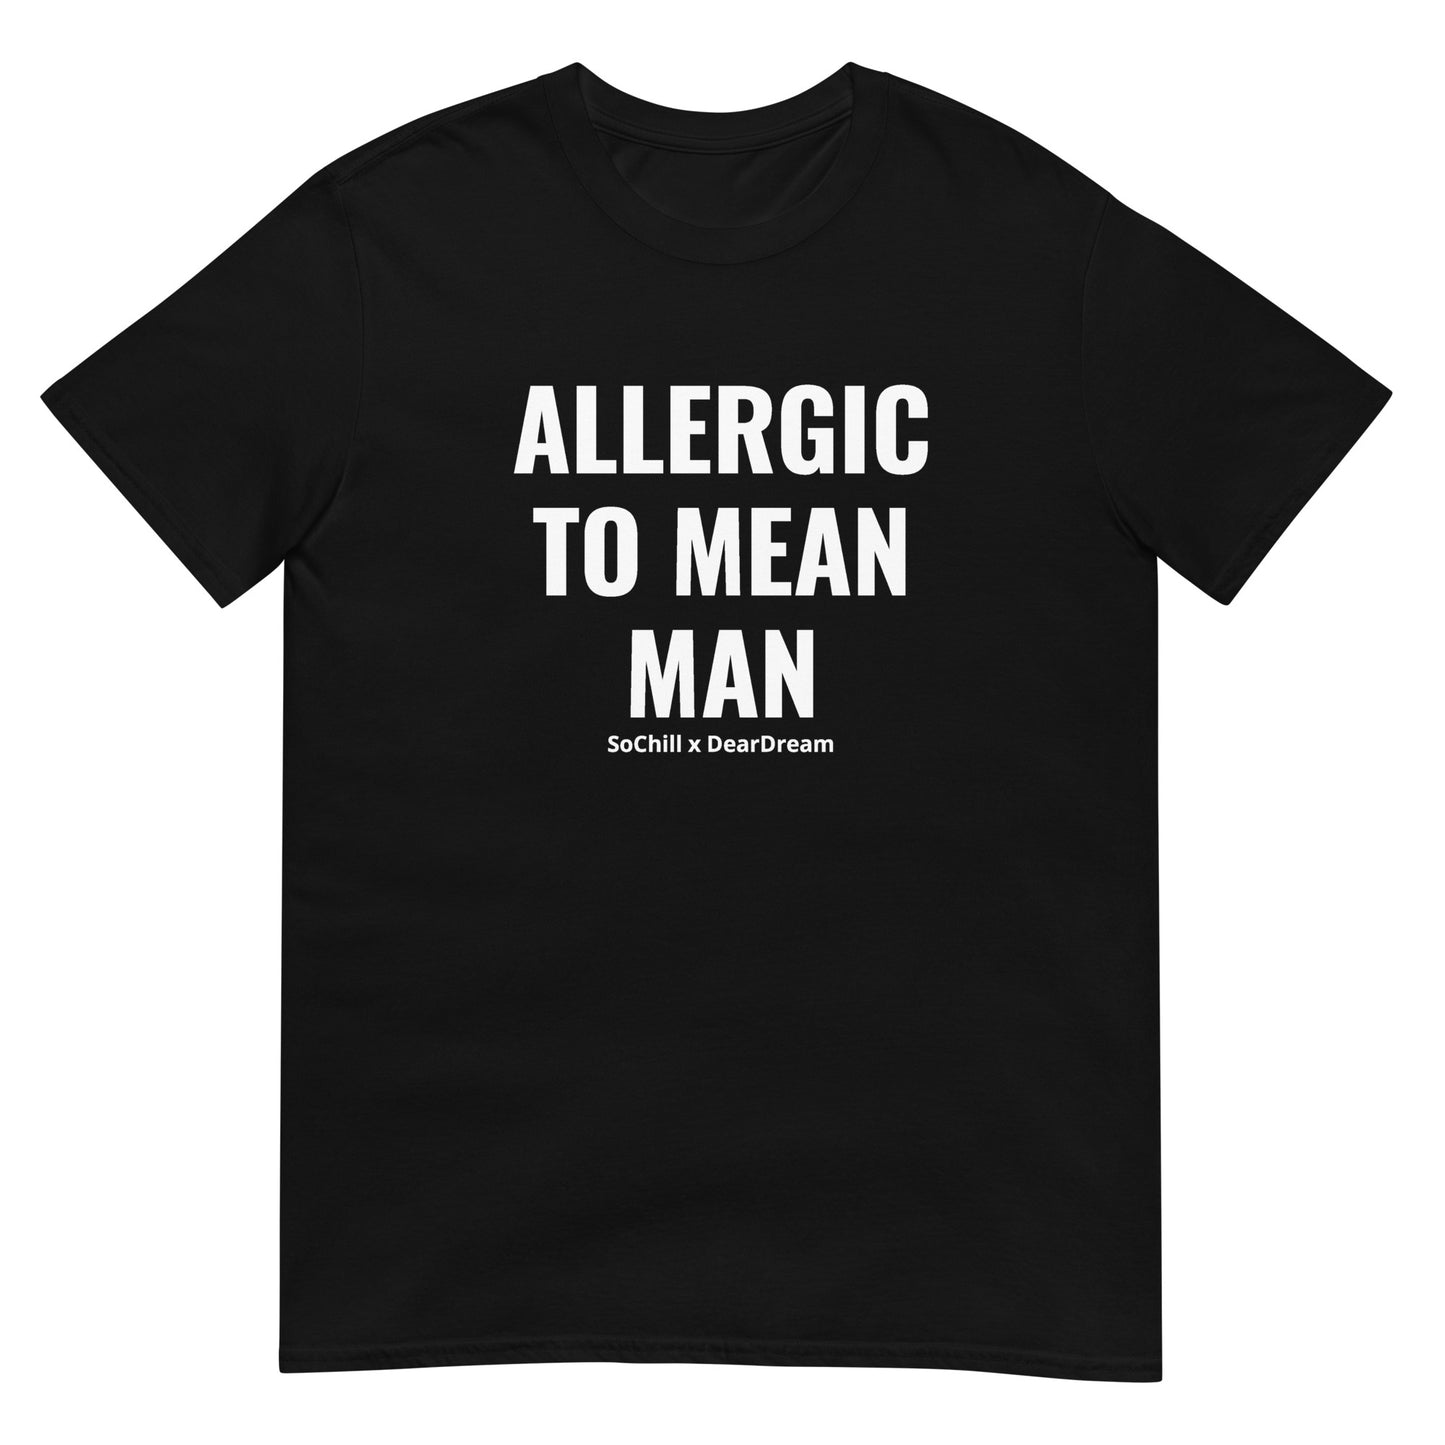 Allergic To Mean Man Tee